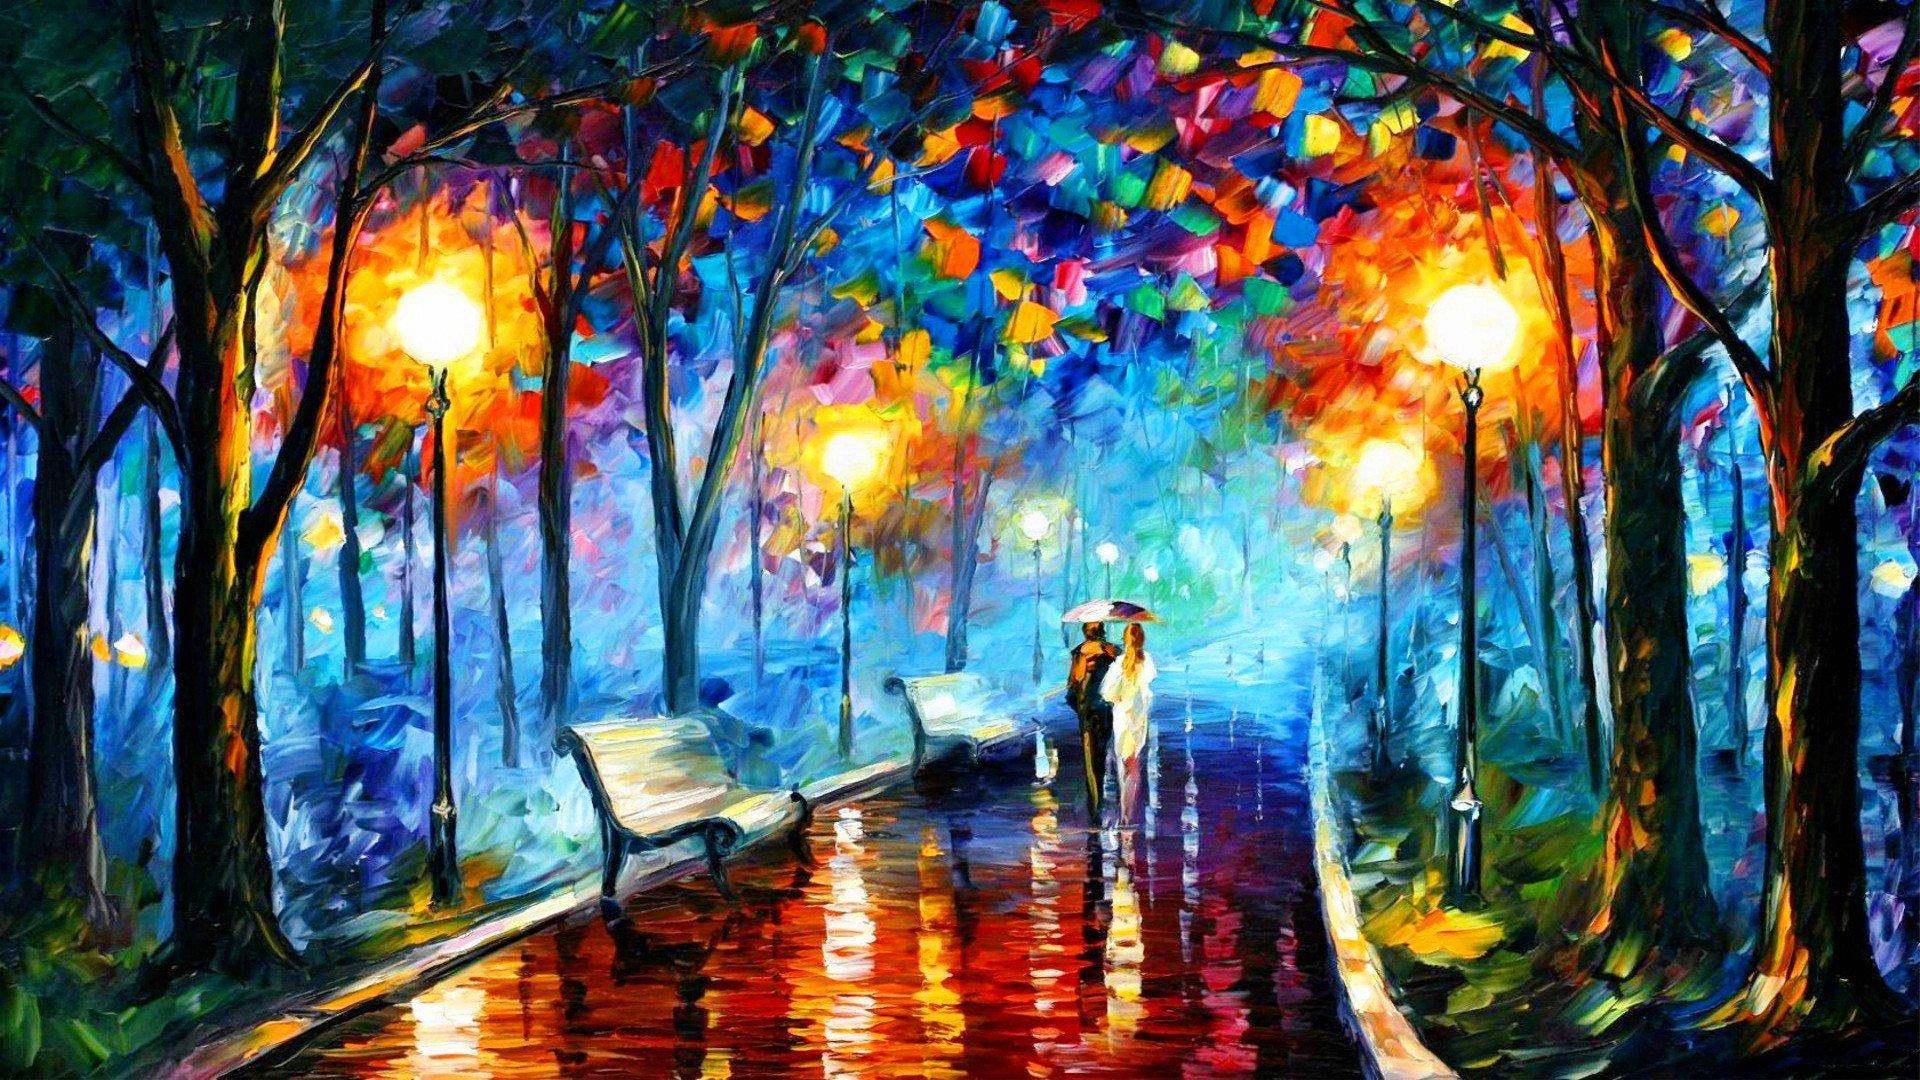 painting, Leonid Afremov, Fall, Bench, Oil painting, Street